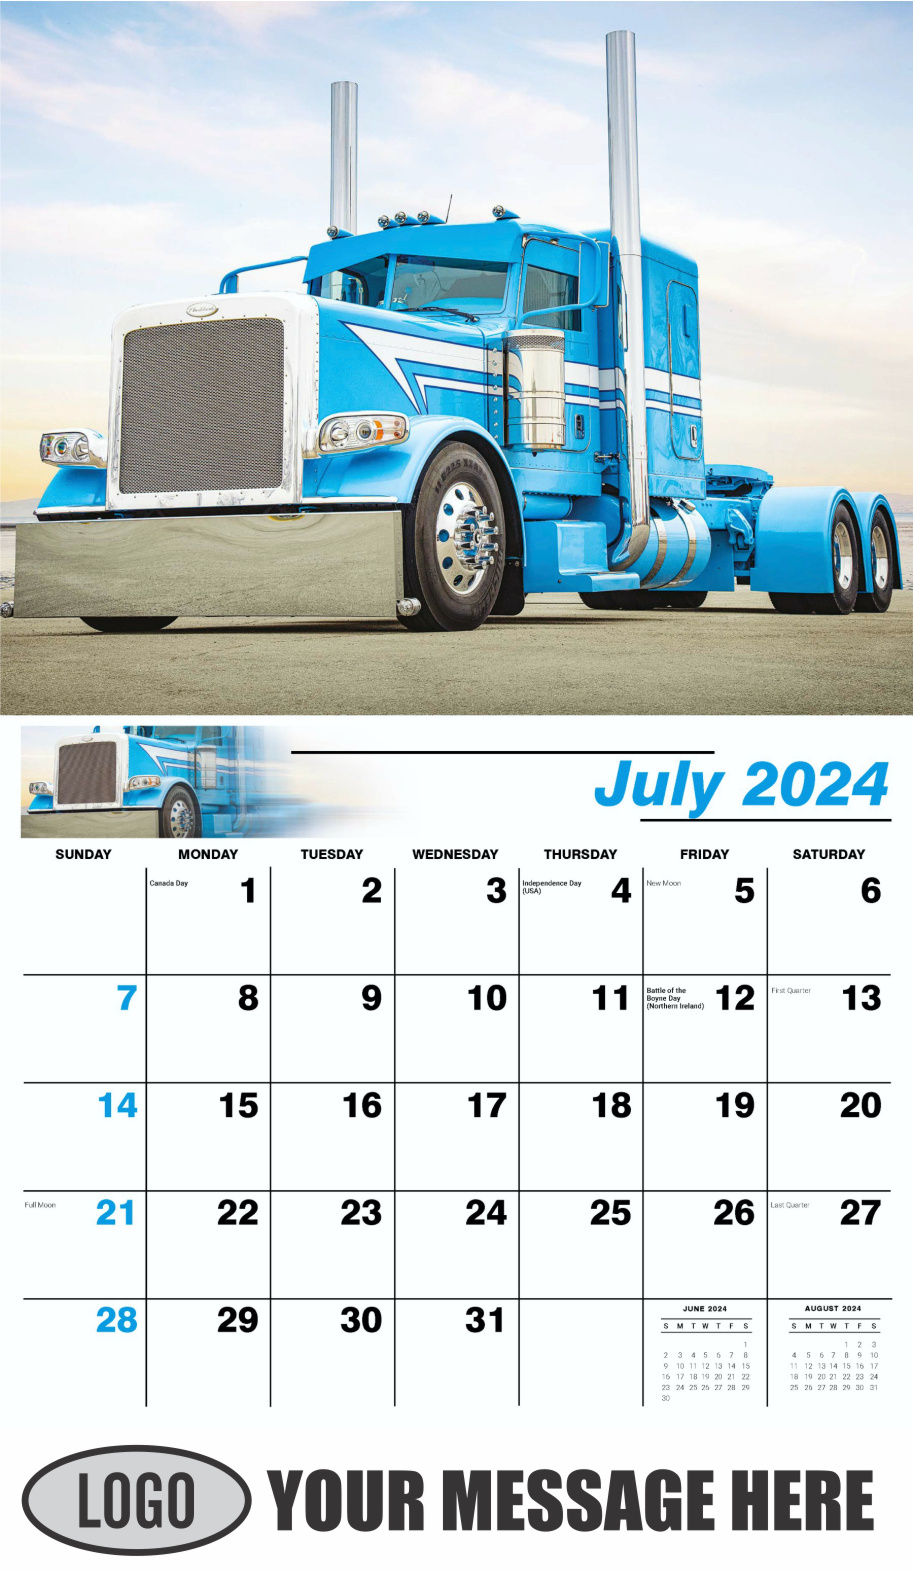 Kings of the Road 2024 Automotive Business Promotional Calendar - July